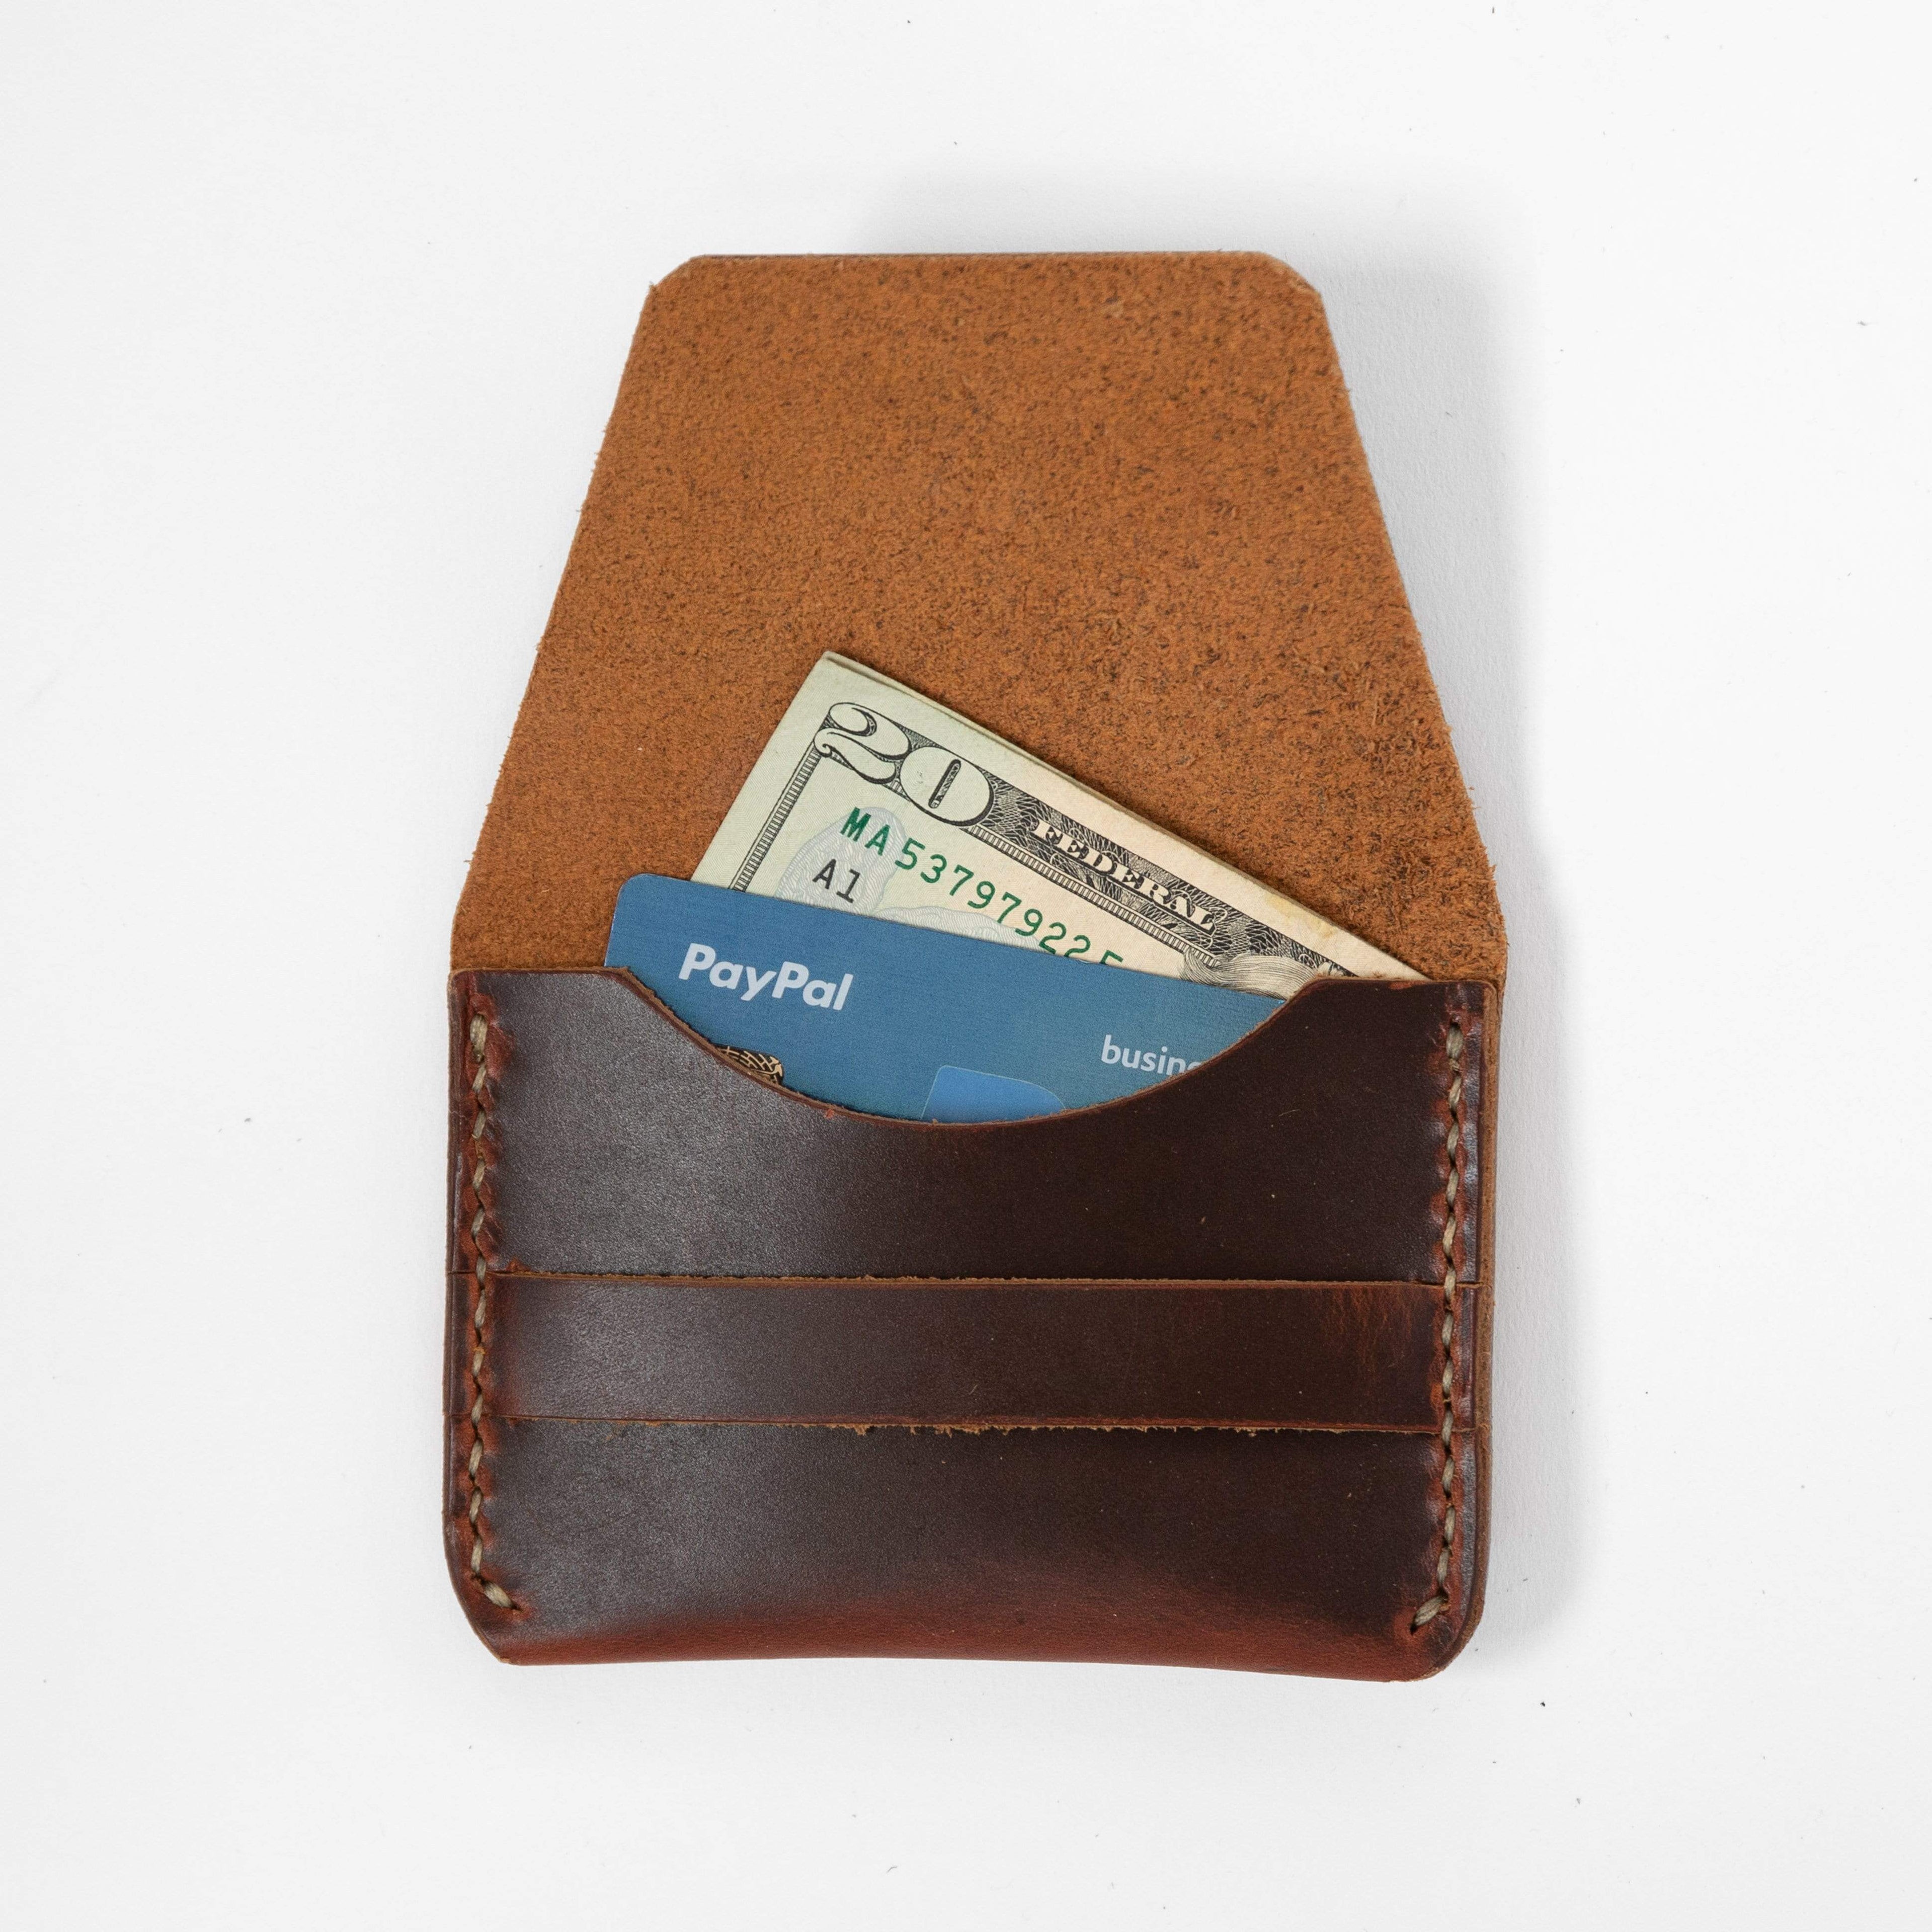 Autumn Harvest Flap Wallet- mens leather wallet - handmade leather wallets at KMM &amp; Co.